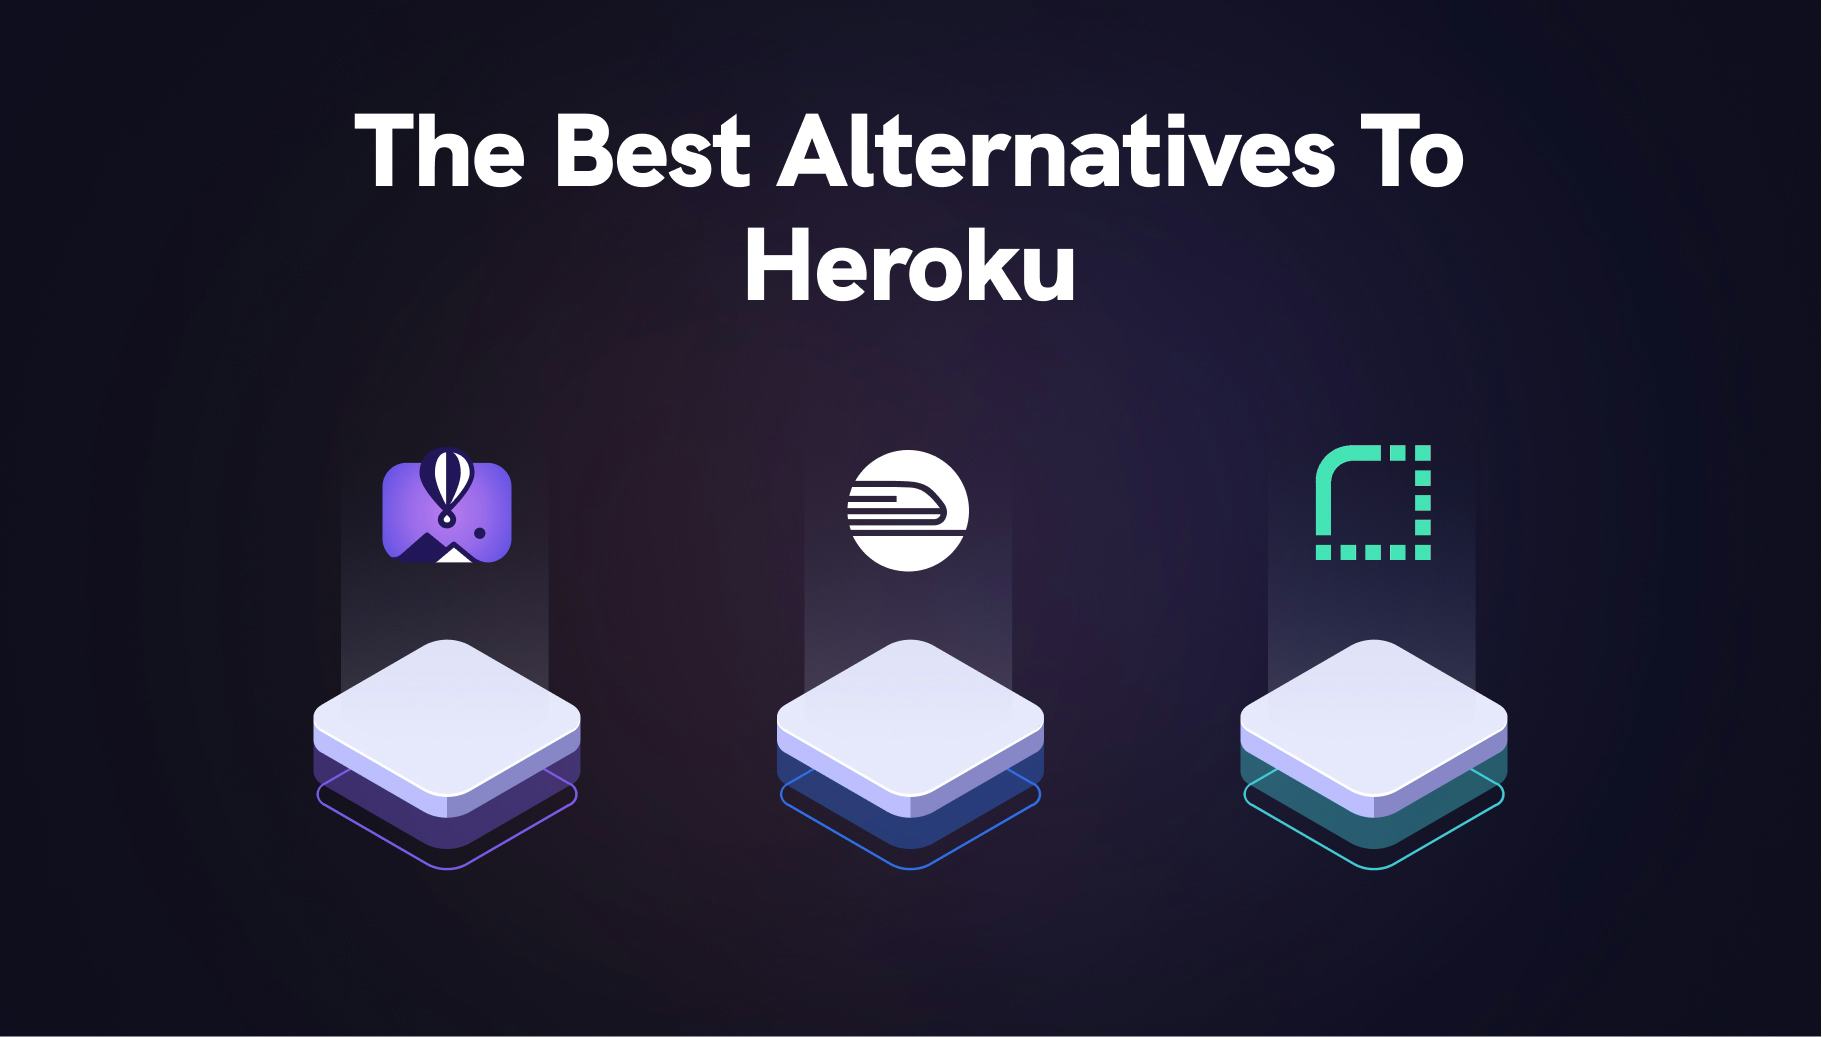 Heroku discontinued their free tier - what are the top 3 best alternatives in 2023? - Qovery